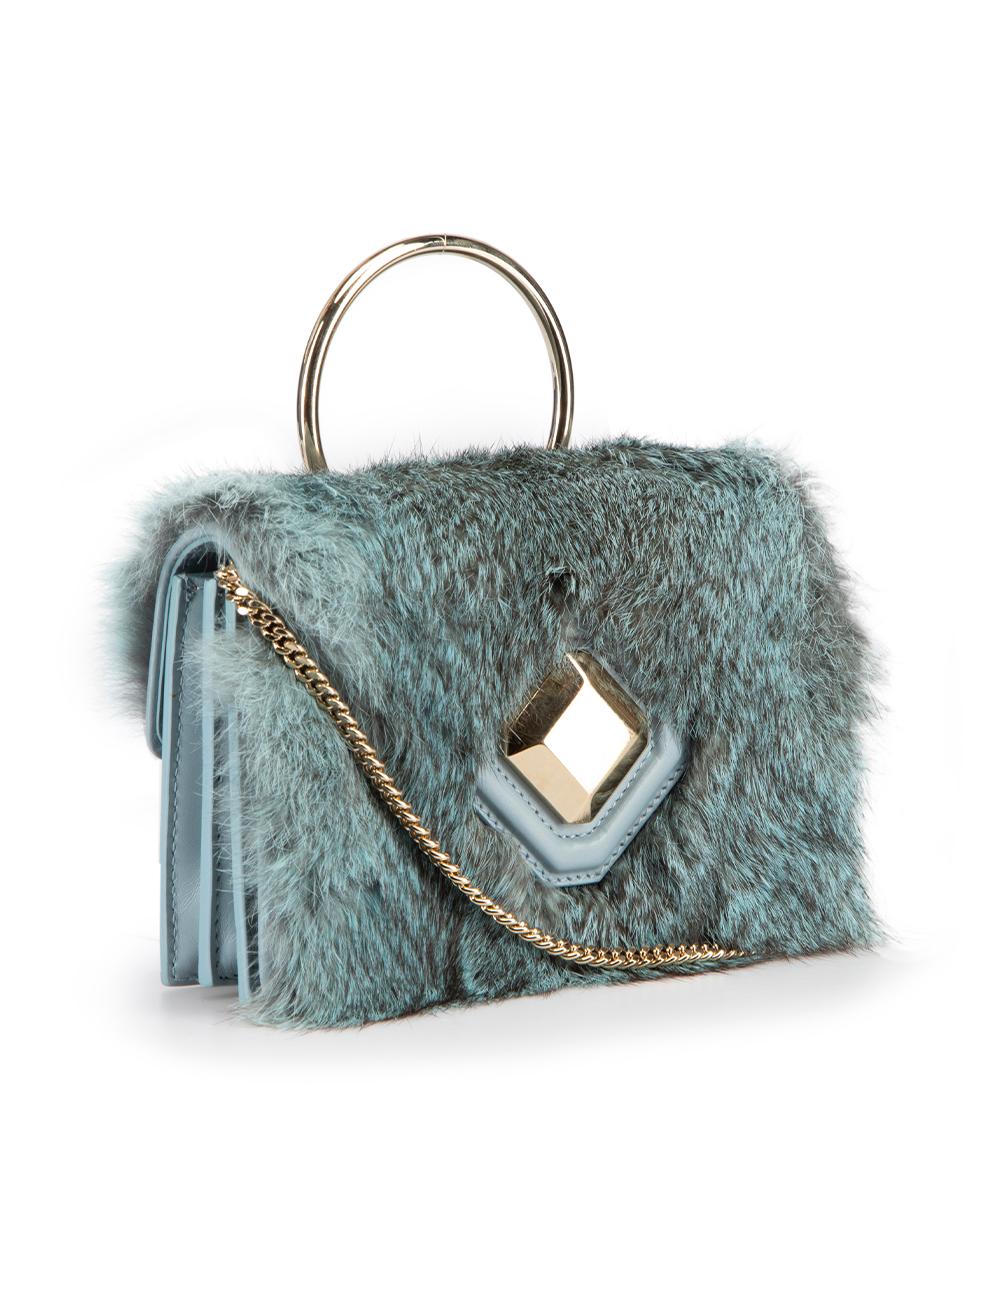 CONDITION is Very good. Minimal wear to bag is evident. Minimal wear to the back with small scratch to the leather and bending of the corner on this used Elie Saab designer resale item.



Details


Blue

Fur and leather

Mini handbag

Gold tone